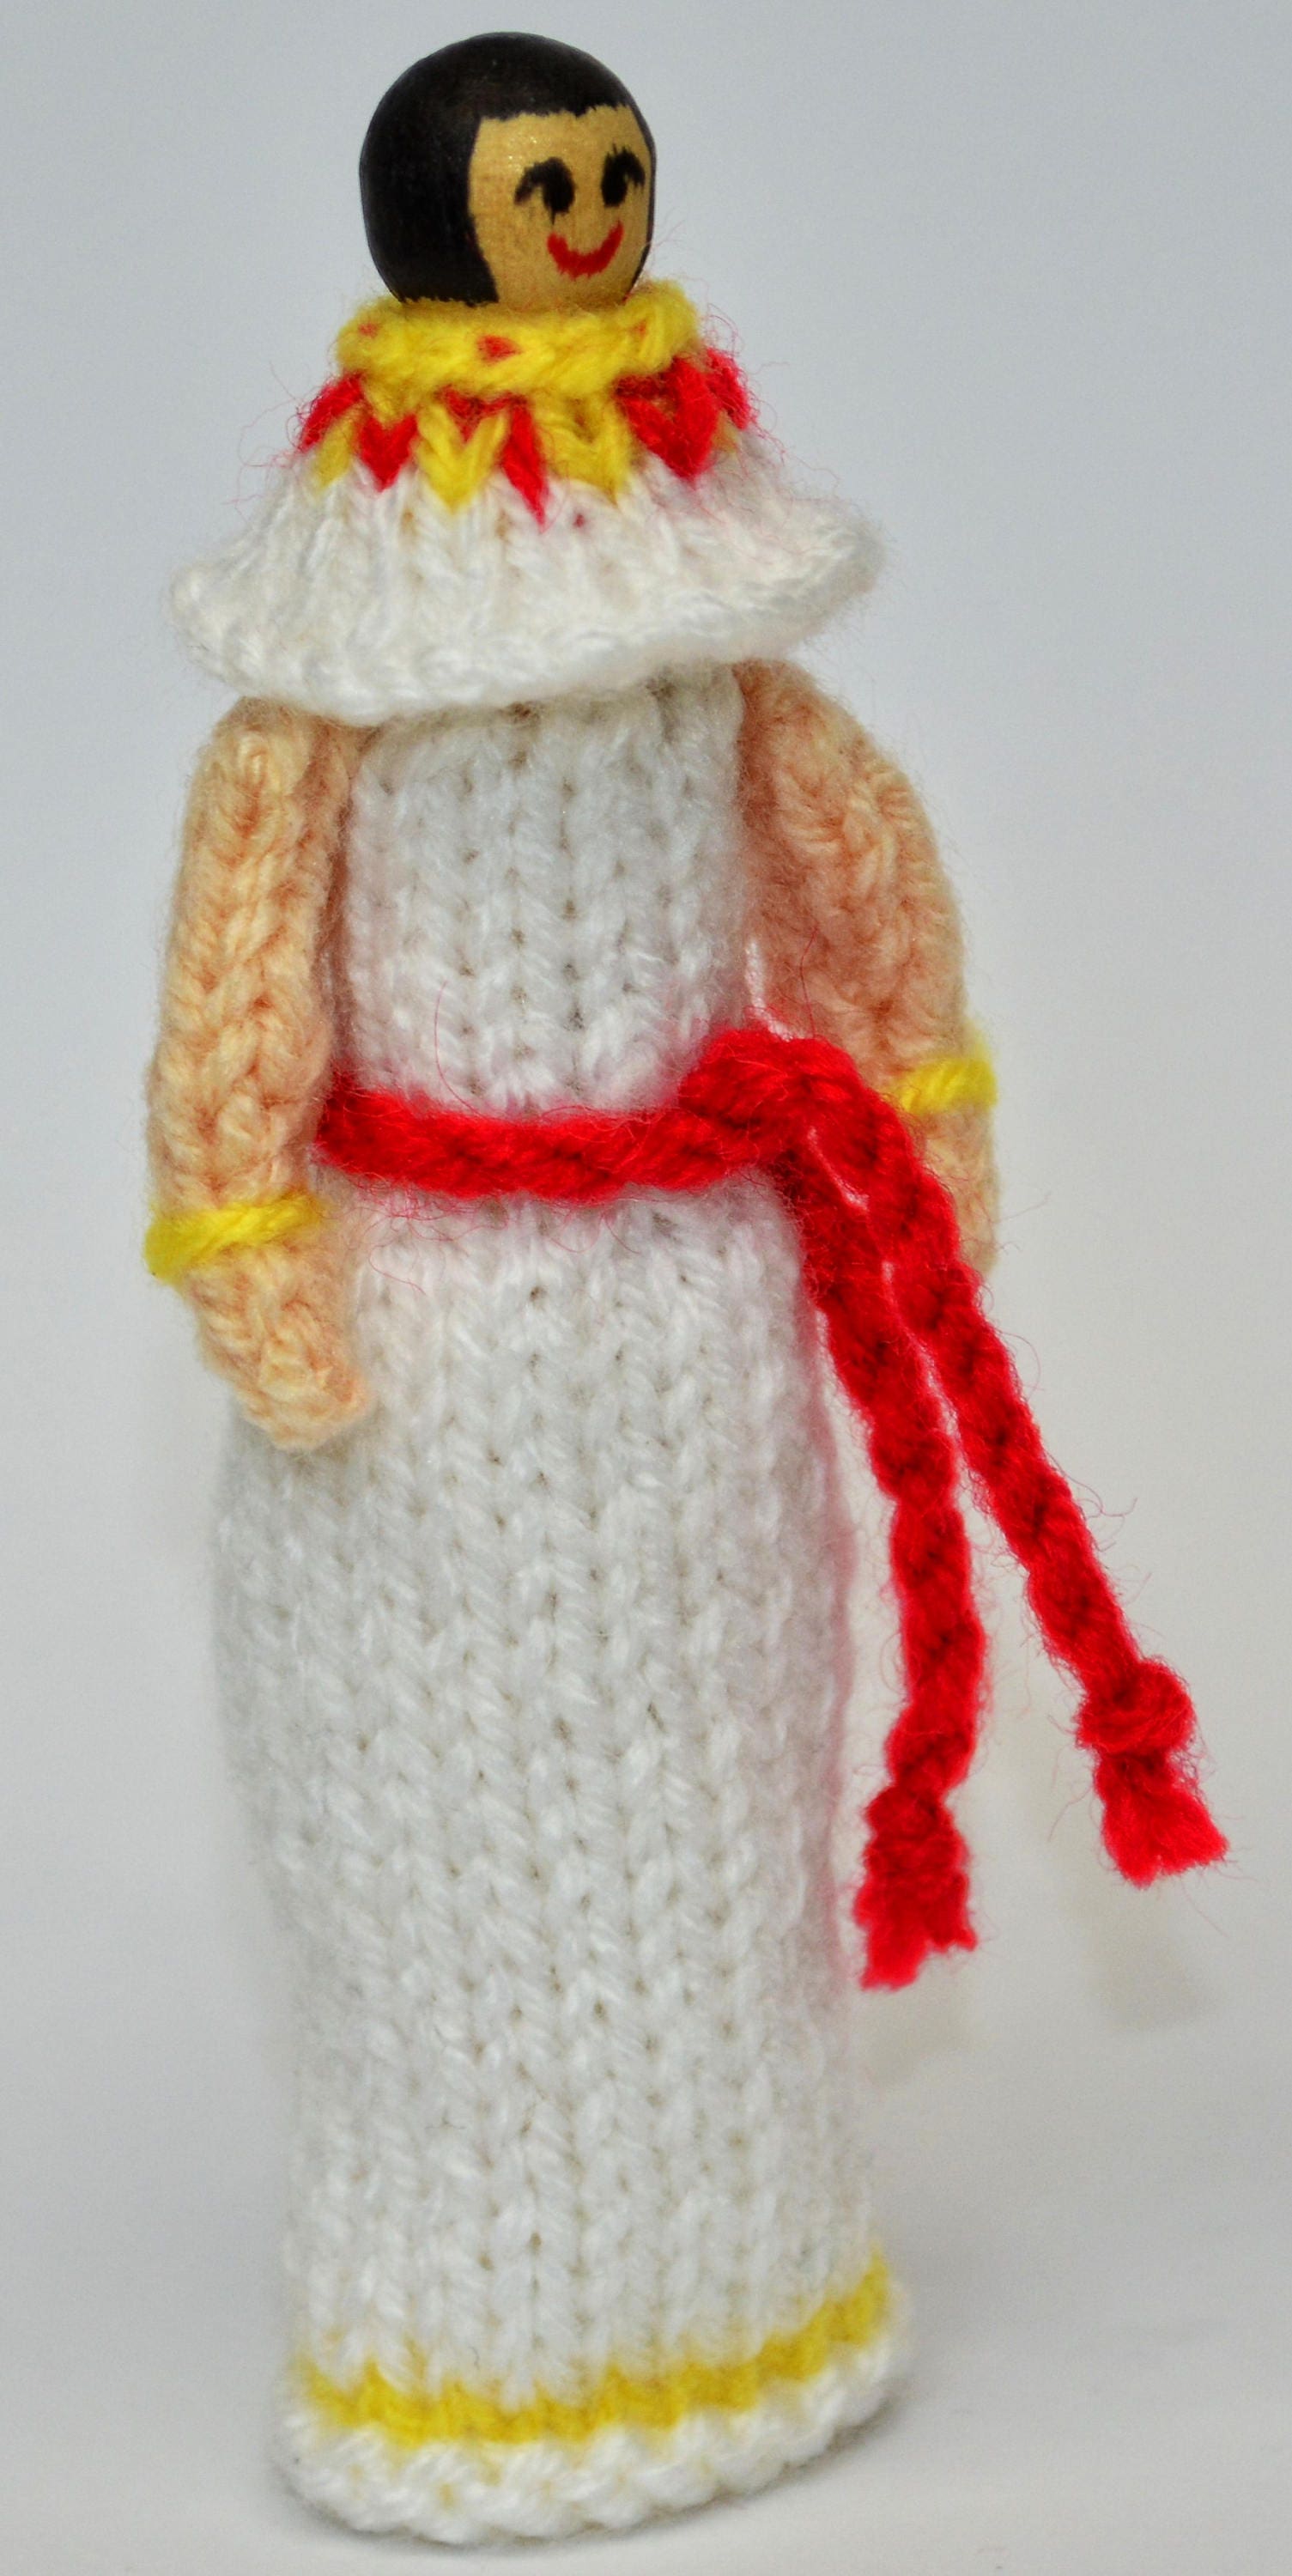 Ancient Egyptian Toy Knitting Pattern, Knitted Peg Doll, Doll Knitting Pattern, Knit Doll ...